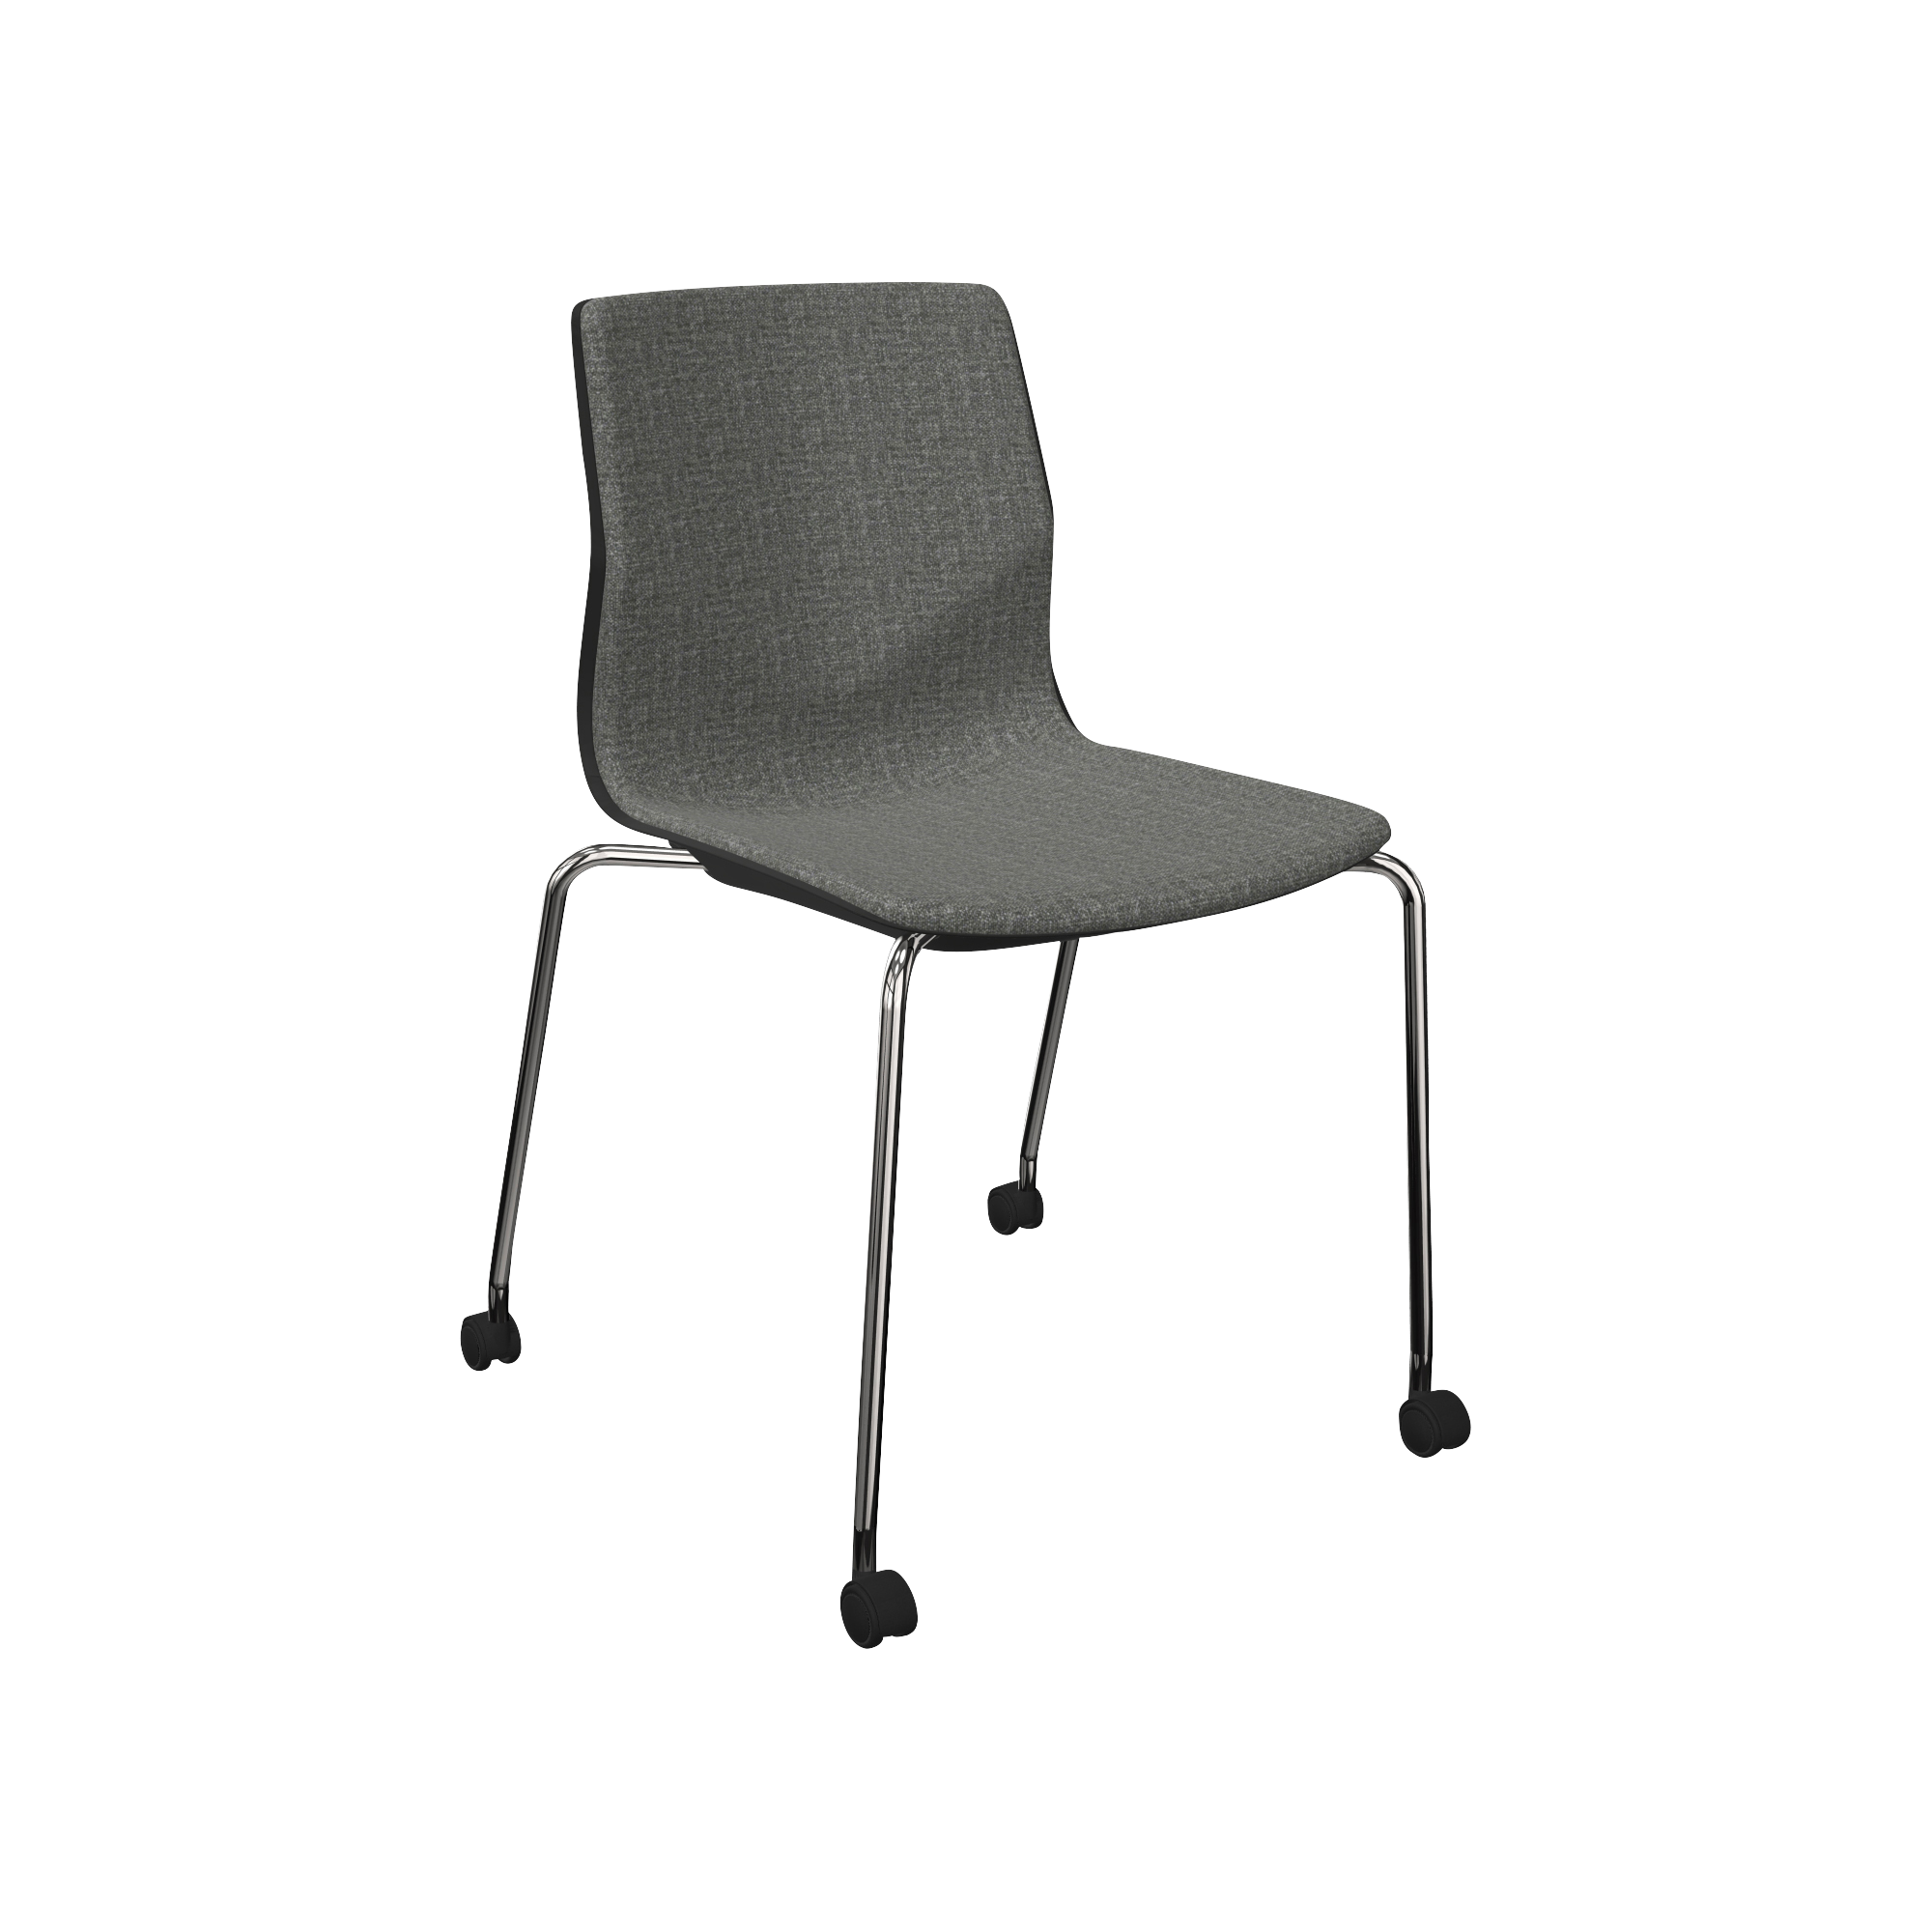 designer office chair with metal legs